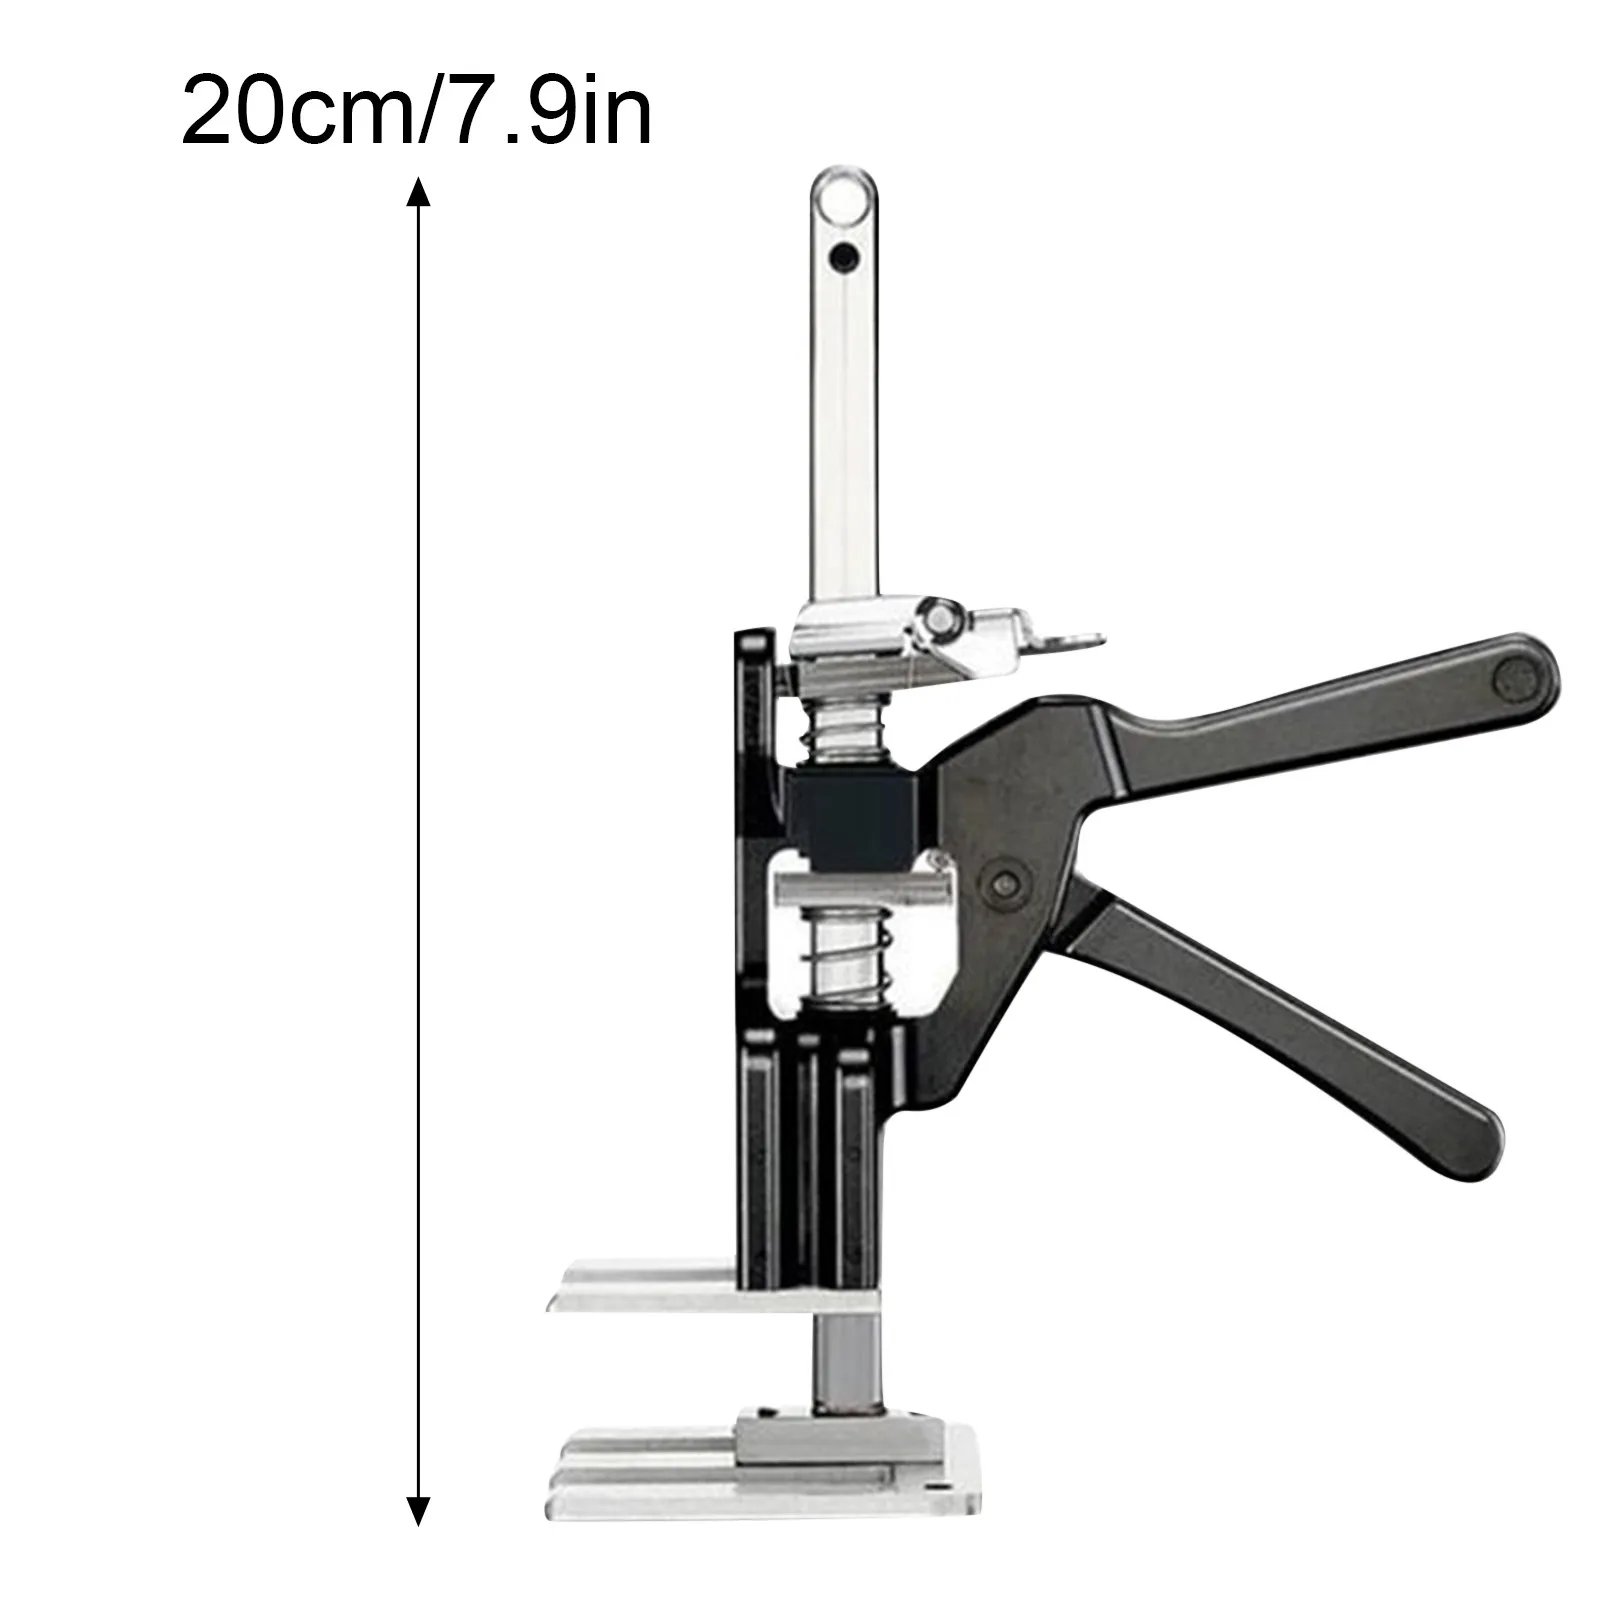 for Support Arm Labor-saving Arm Quick-action Clamp Capacity Of Up To 260 lb / 120 kg Arm Board Lifter Cabinet Jack Door Use Hand Tool Effort Elevator 1 Precision Clamping Tool 